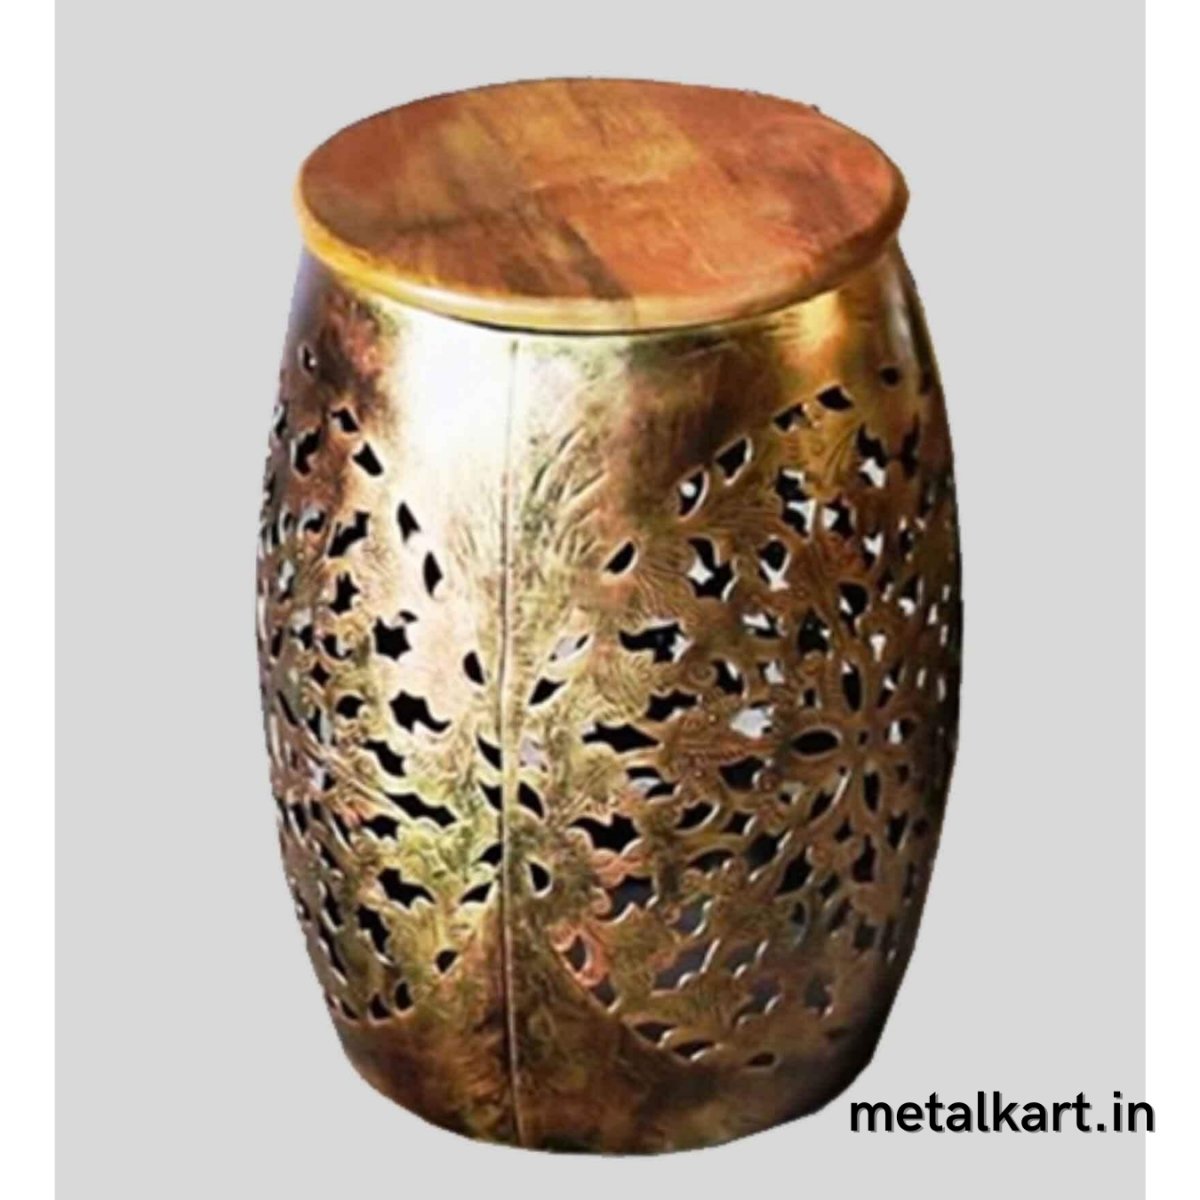 Handcrafted Multipurpose Metallic Stool For living room (14*17*14 Inches approx)